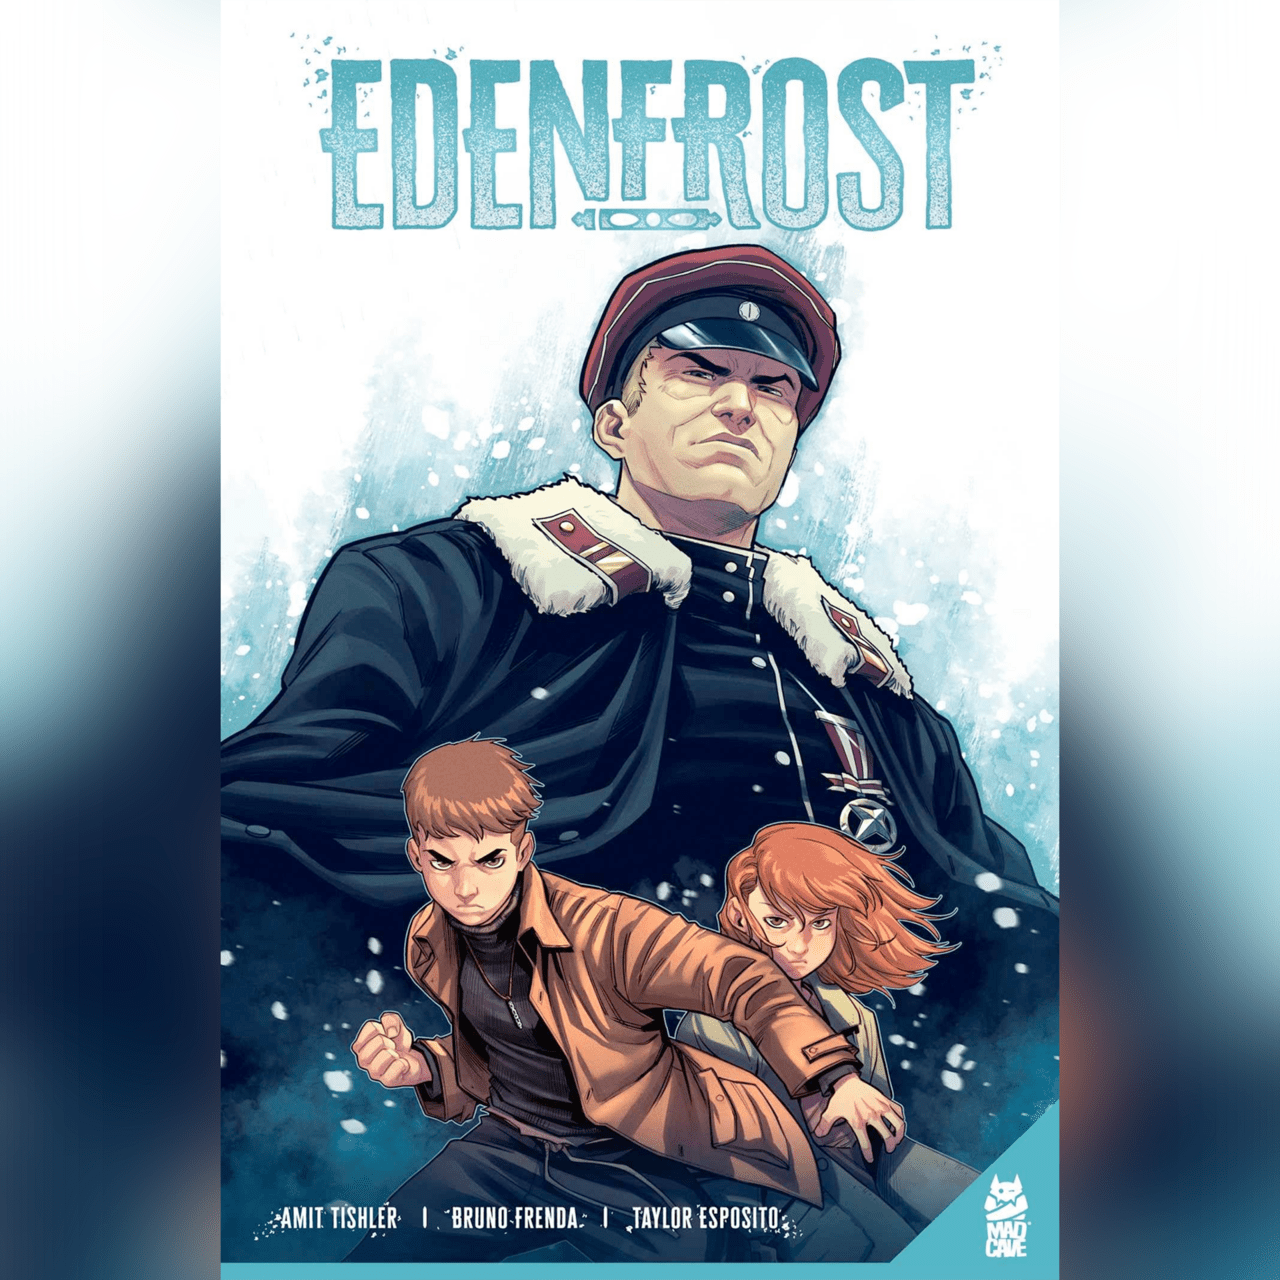 The front cover to the first issue of the comic book Edenfrost.